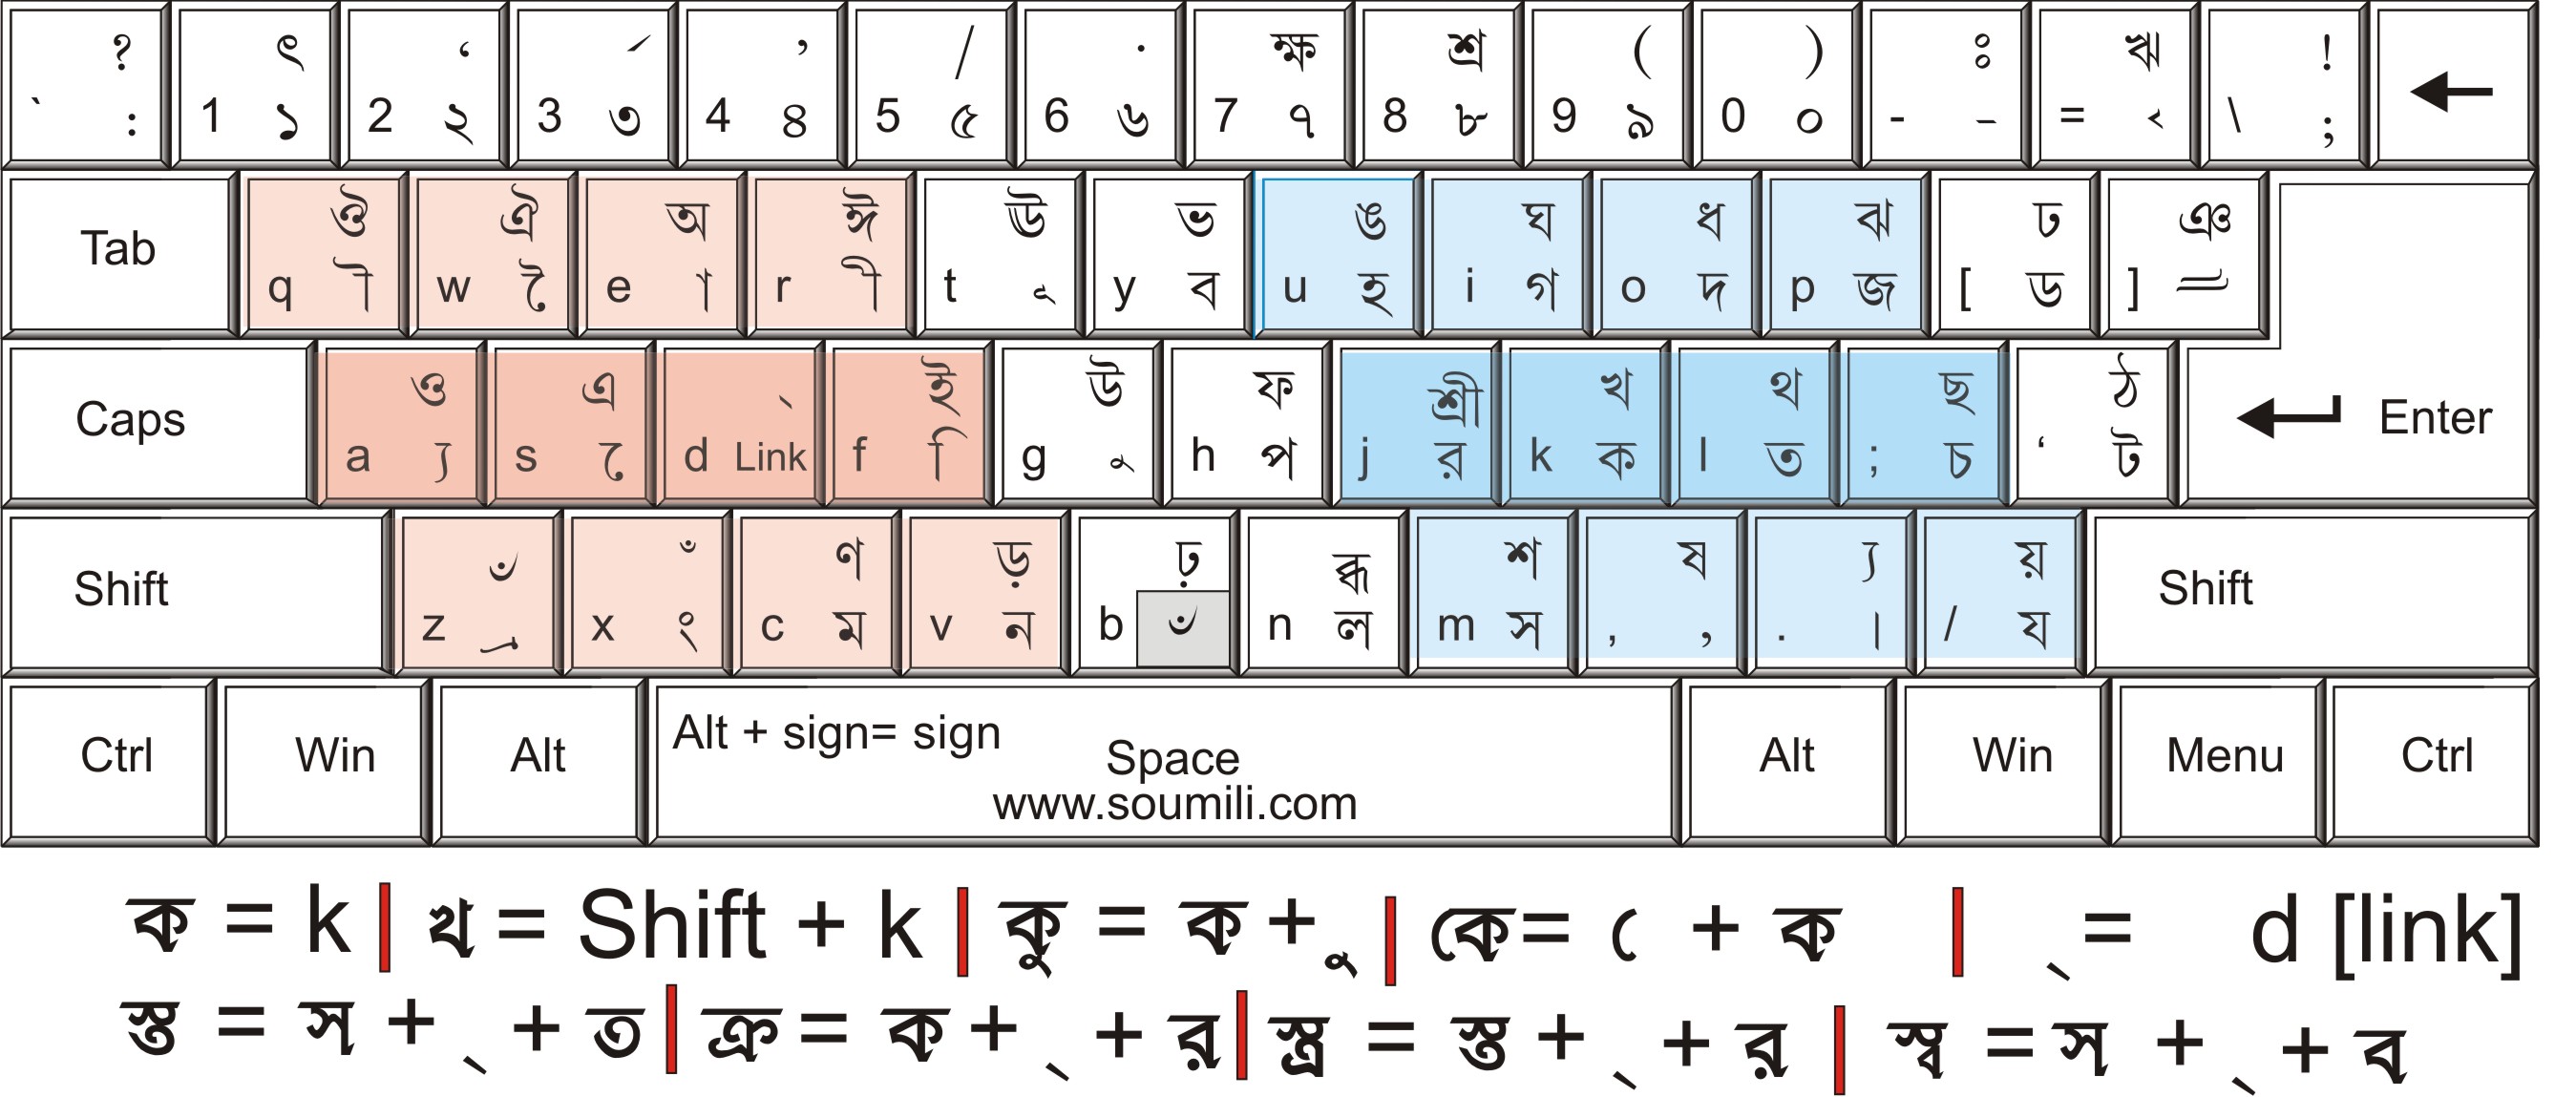 bengali typing software for pagemaker softwaredownload